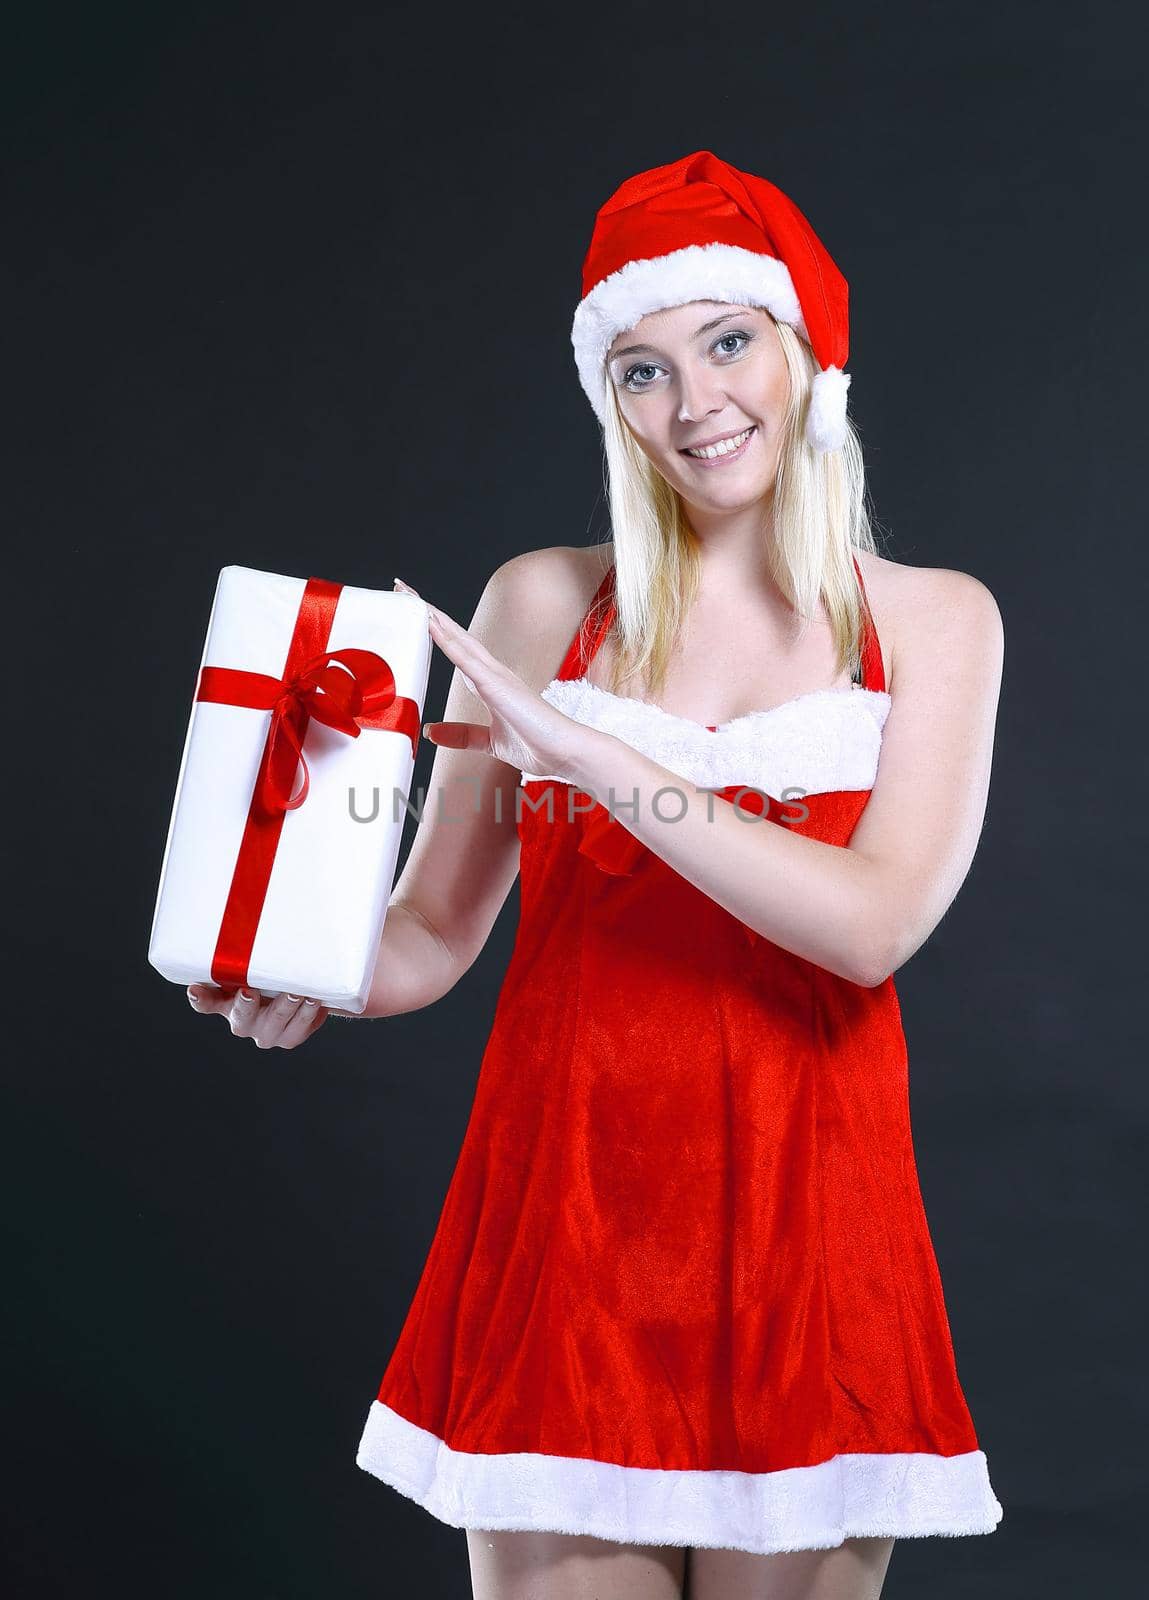 blonde woman in costume of Santa Claus with Christmas gift.photo with copy space.